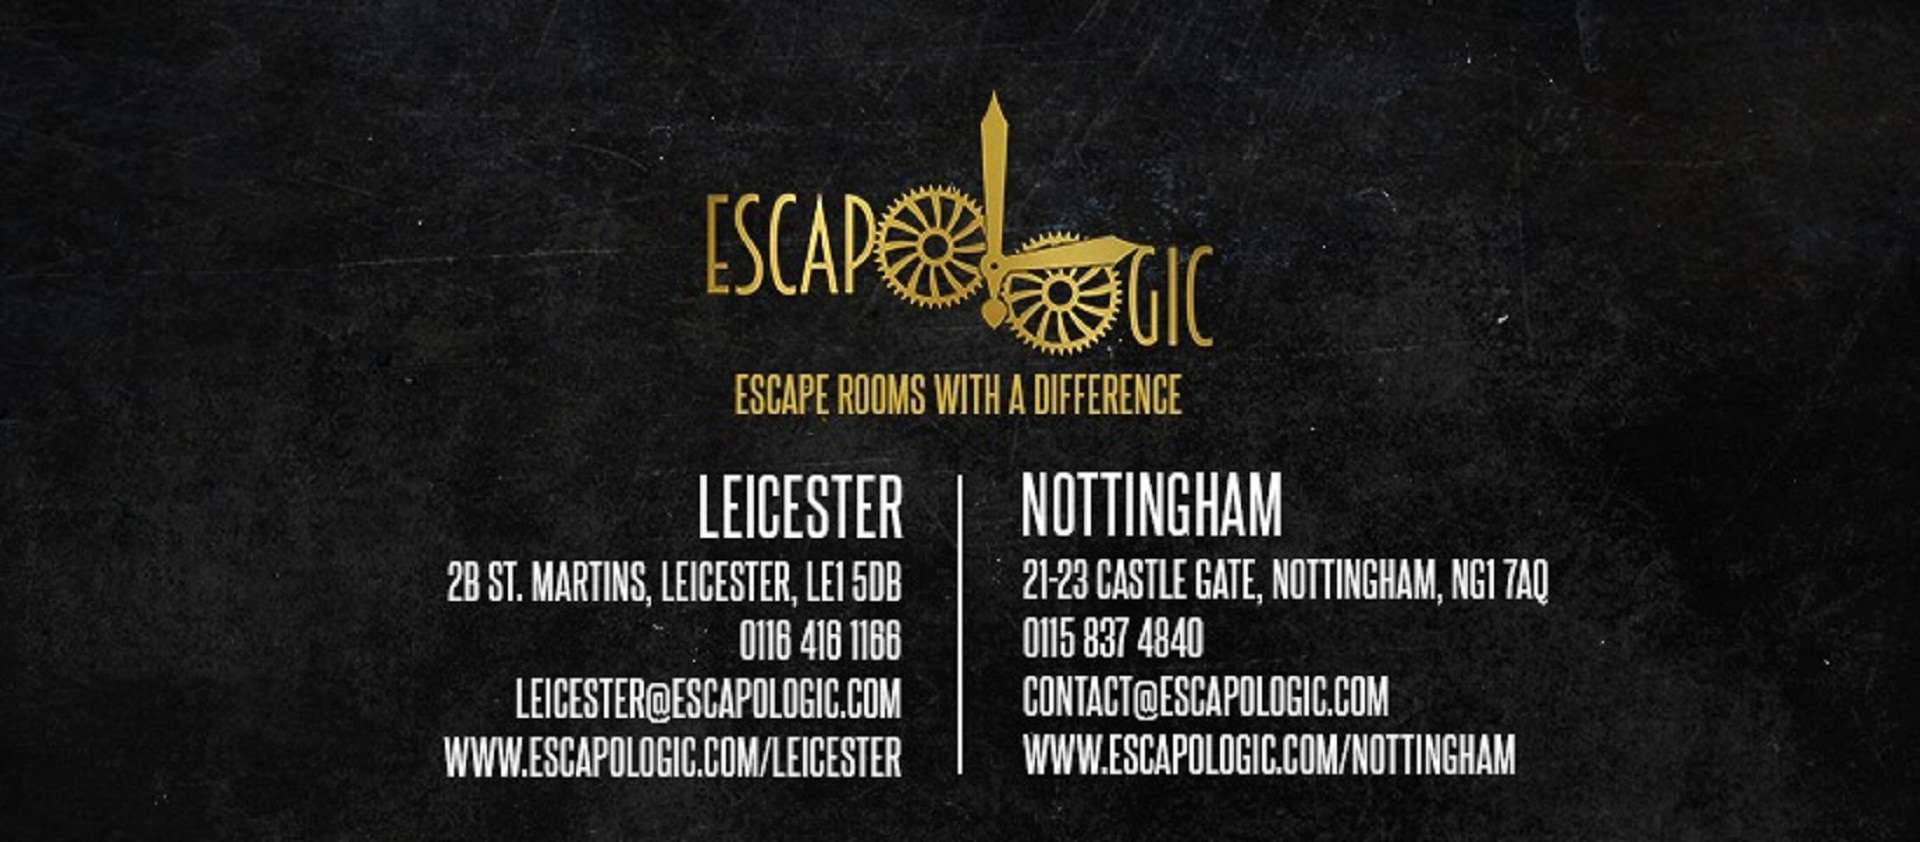 Escapologic Escape Rooms Leicester in UK